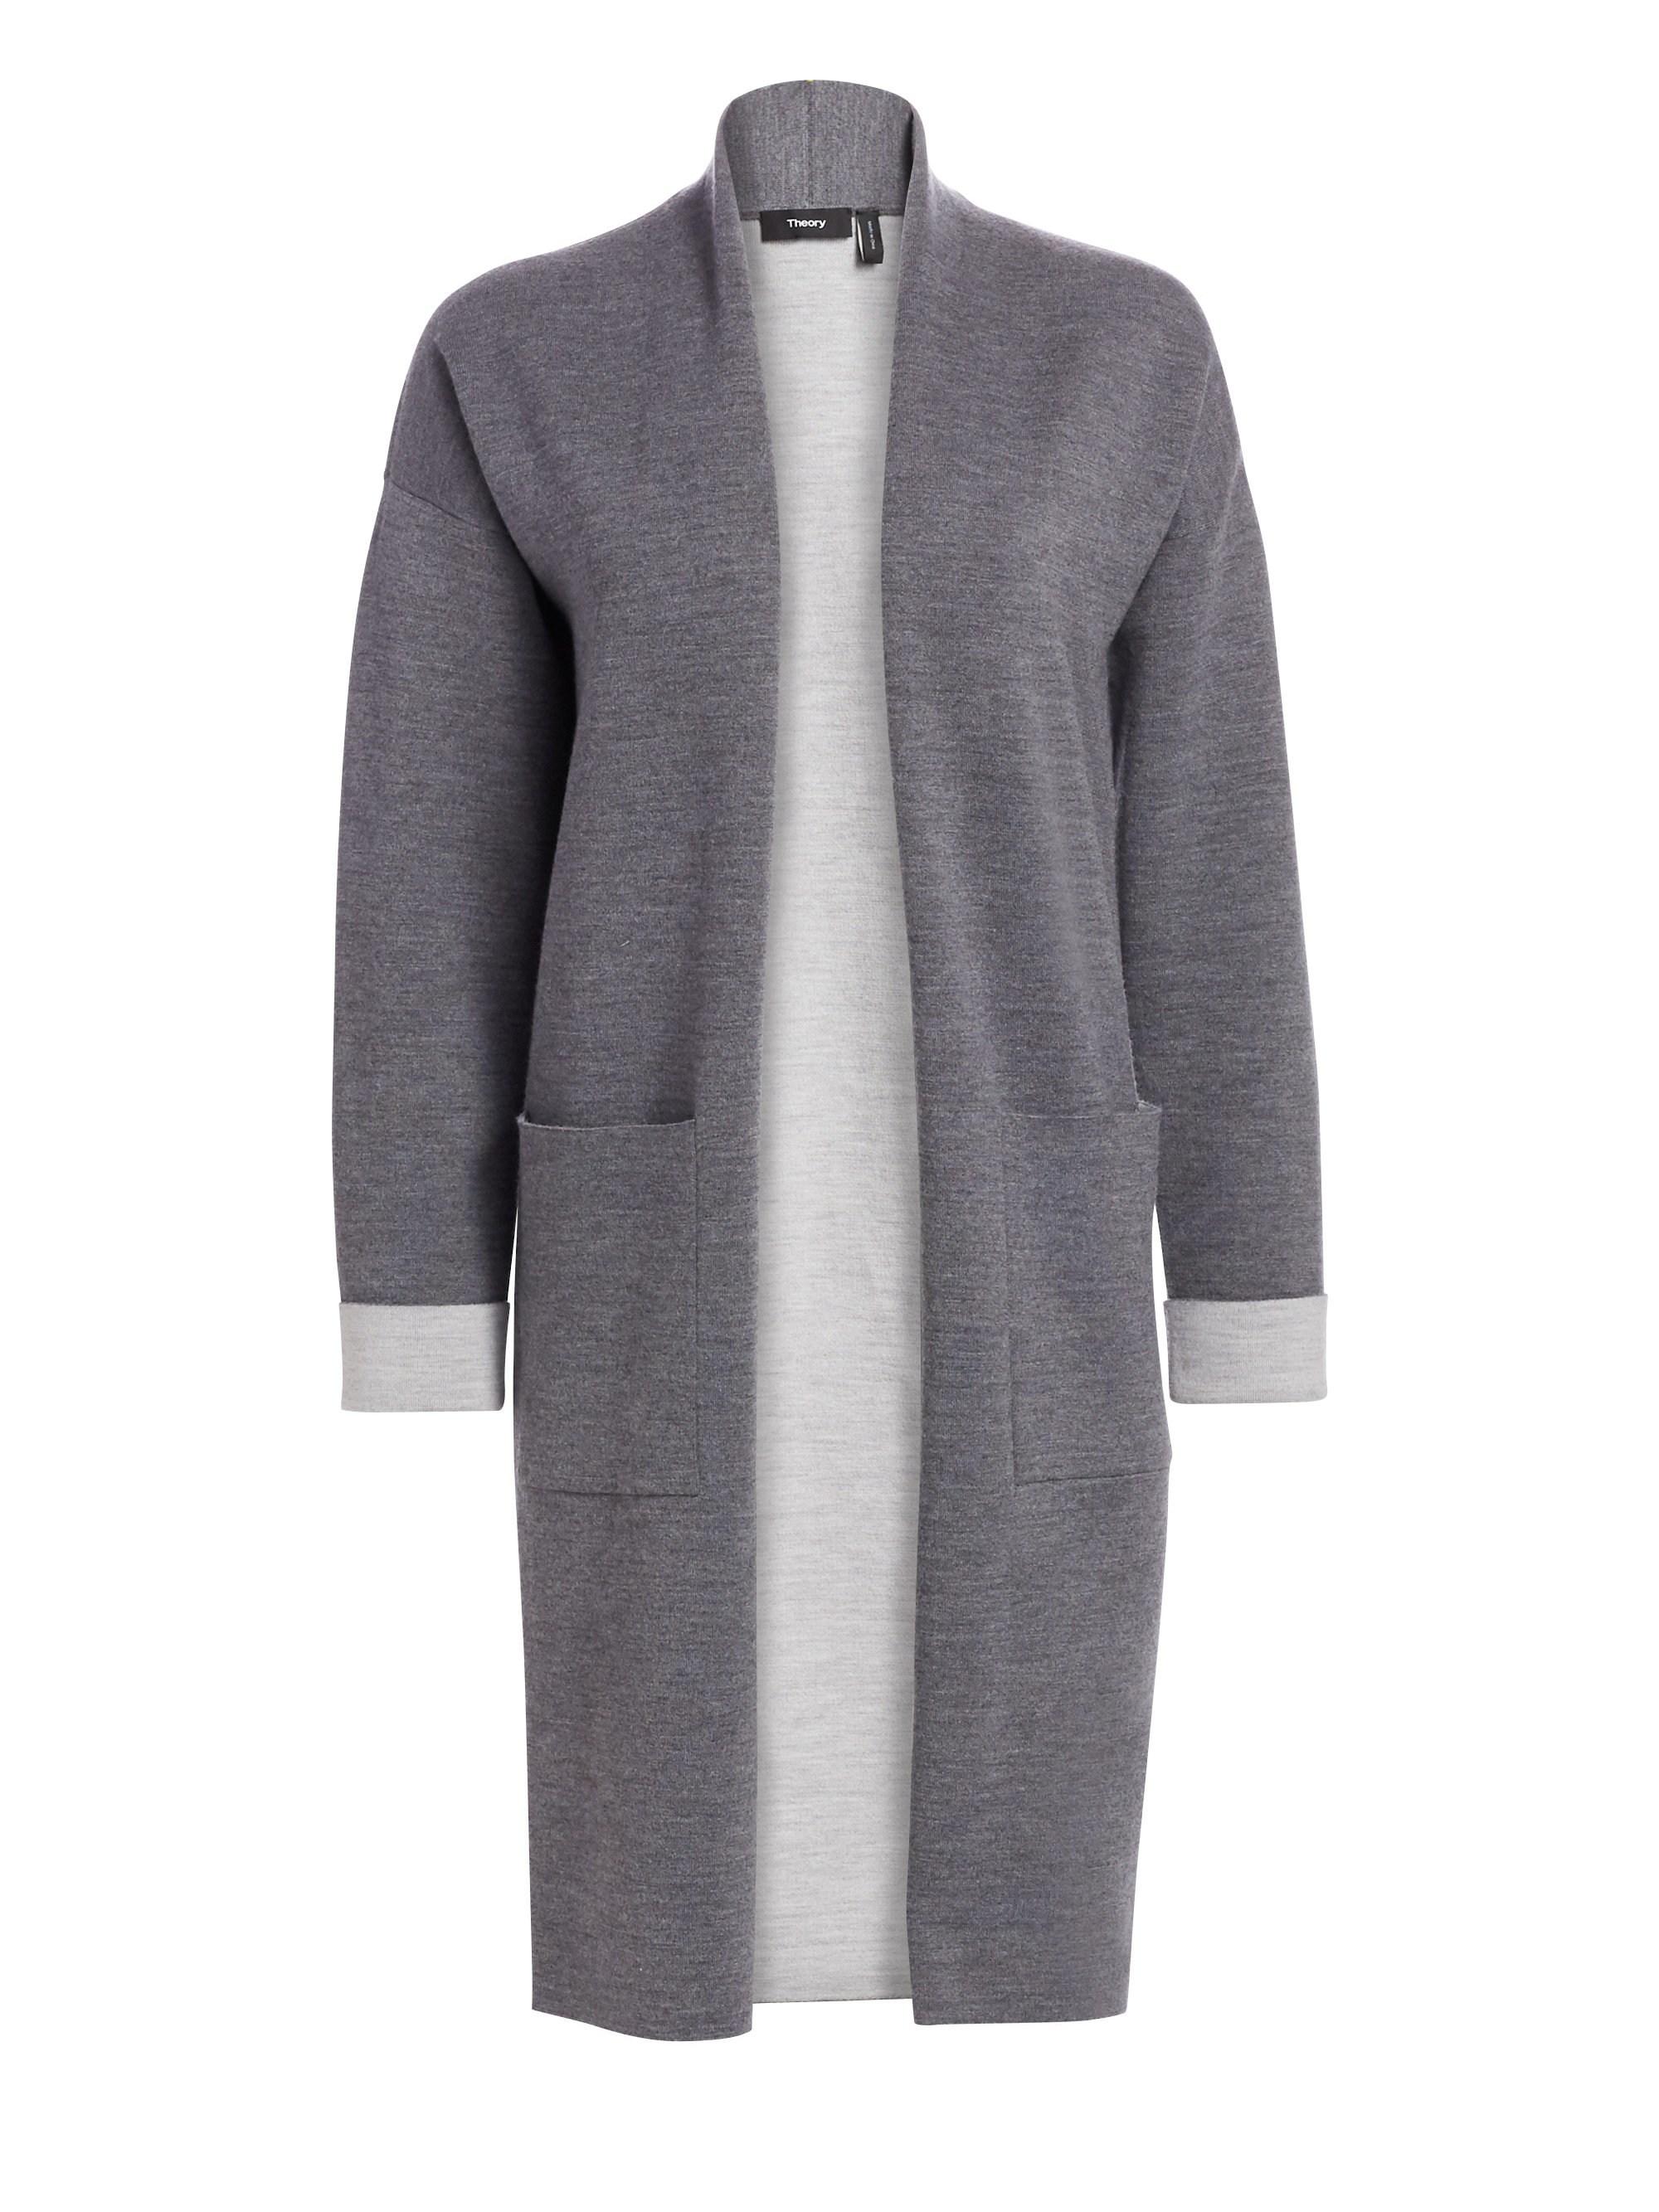 Theory Women's Double Face Wool-blend Cardigan - Charcoal Grey in Gray ...